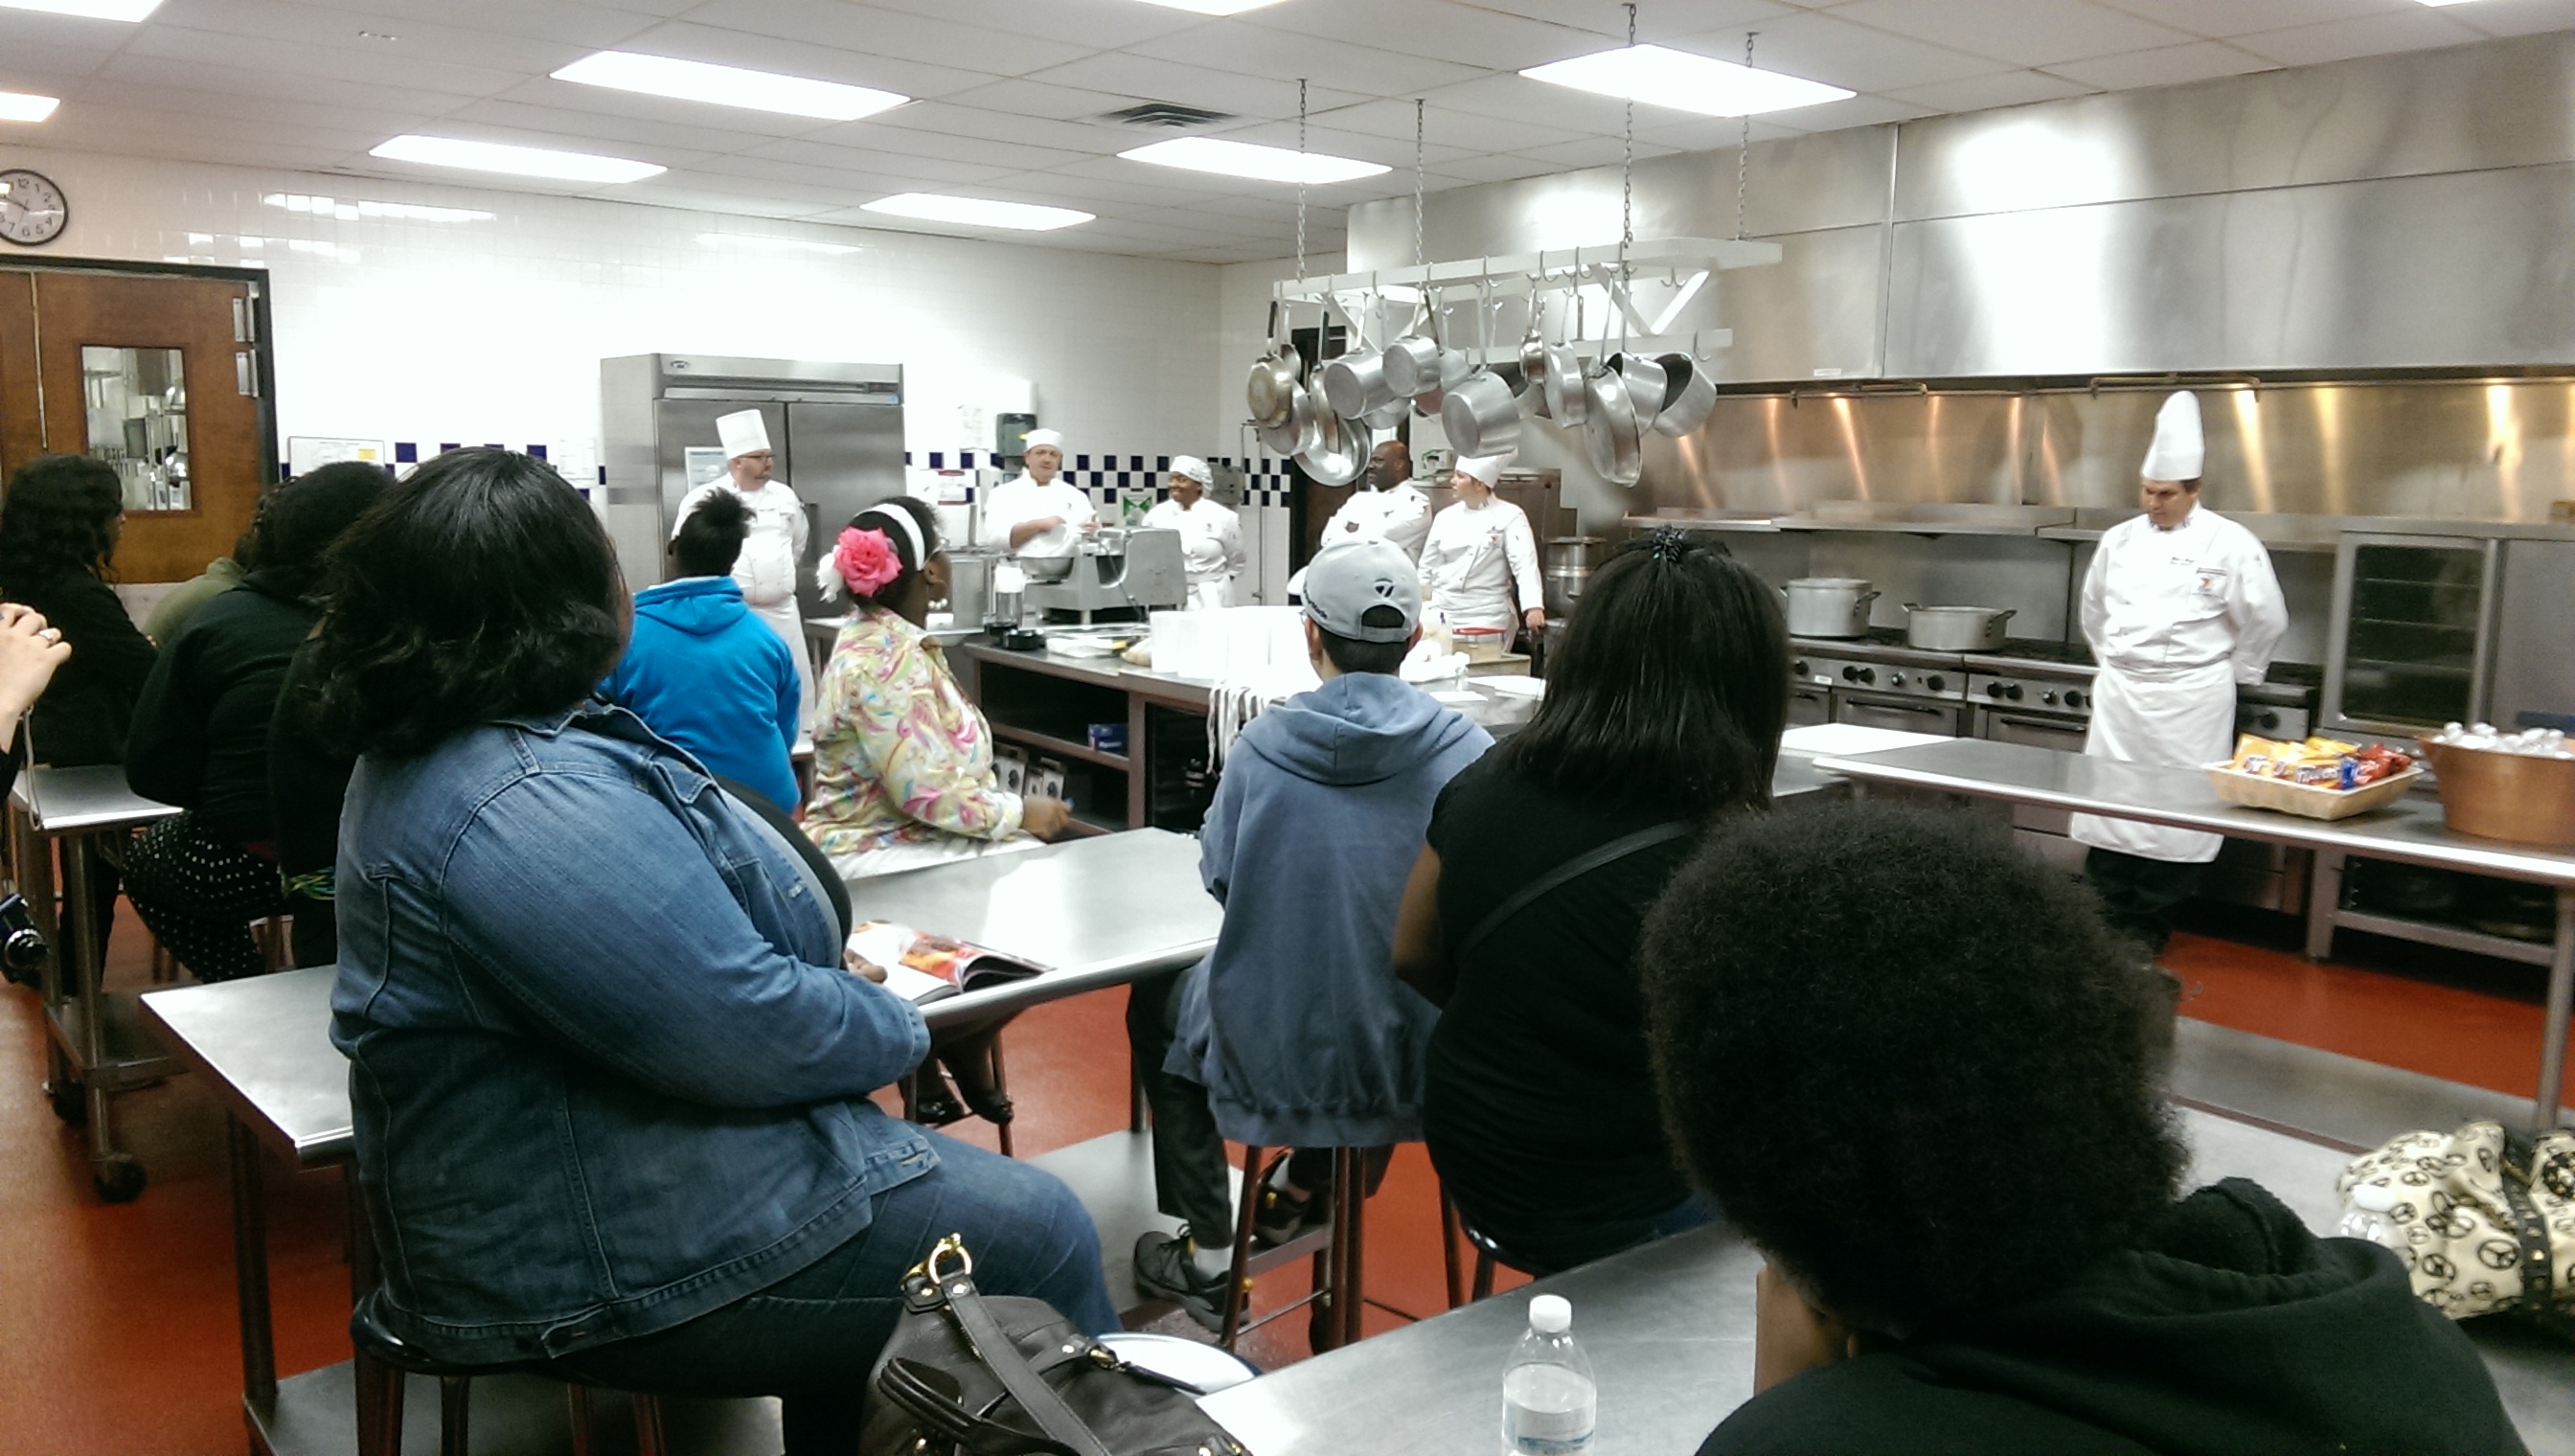 The instructors and culinary students provided a tour of the school and demonstrated various cooking skills.